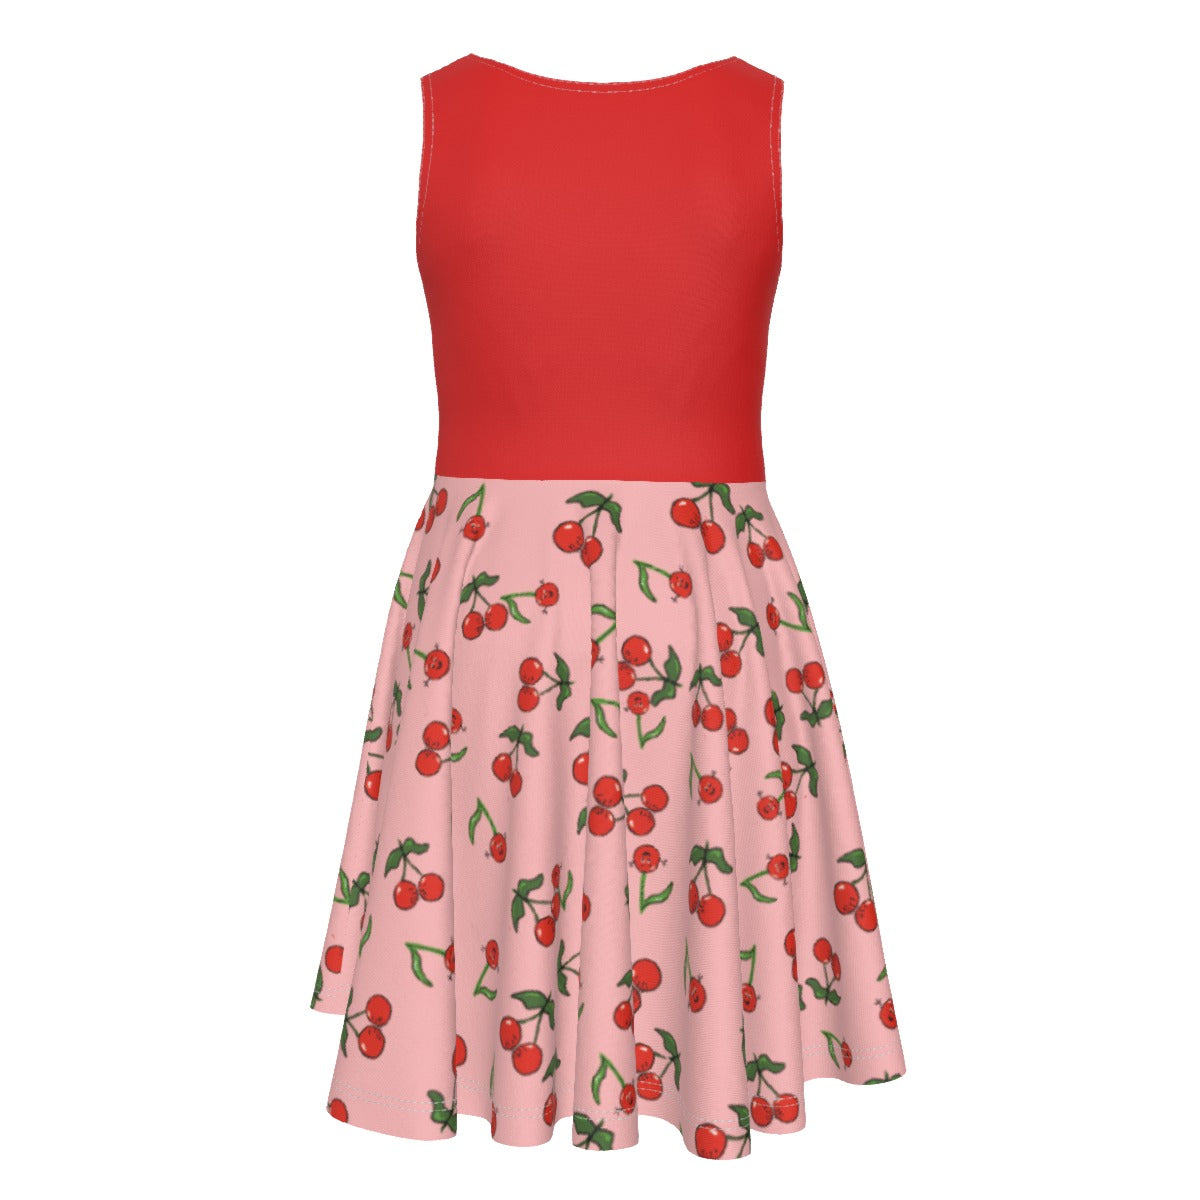 Girls Cherry Dress with Red Top